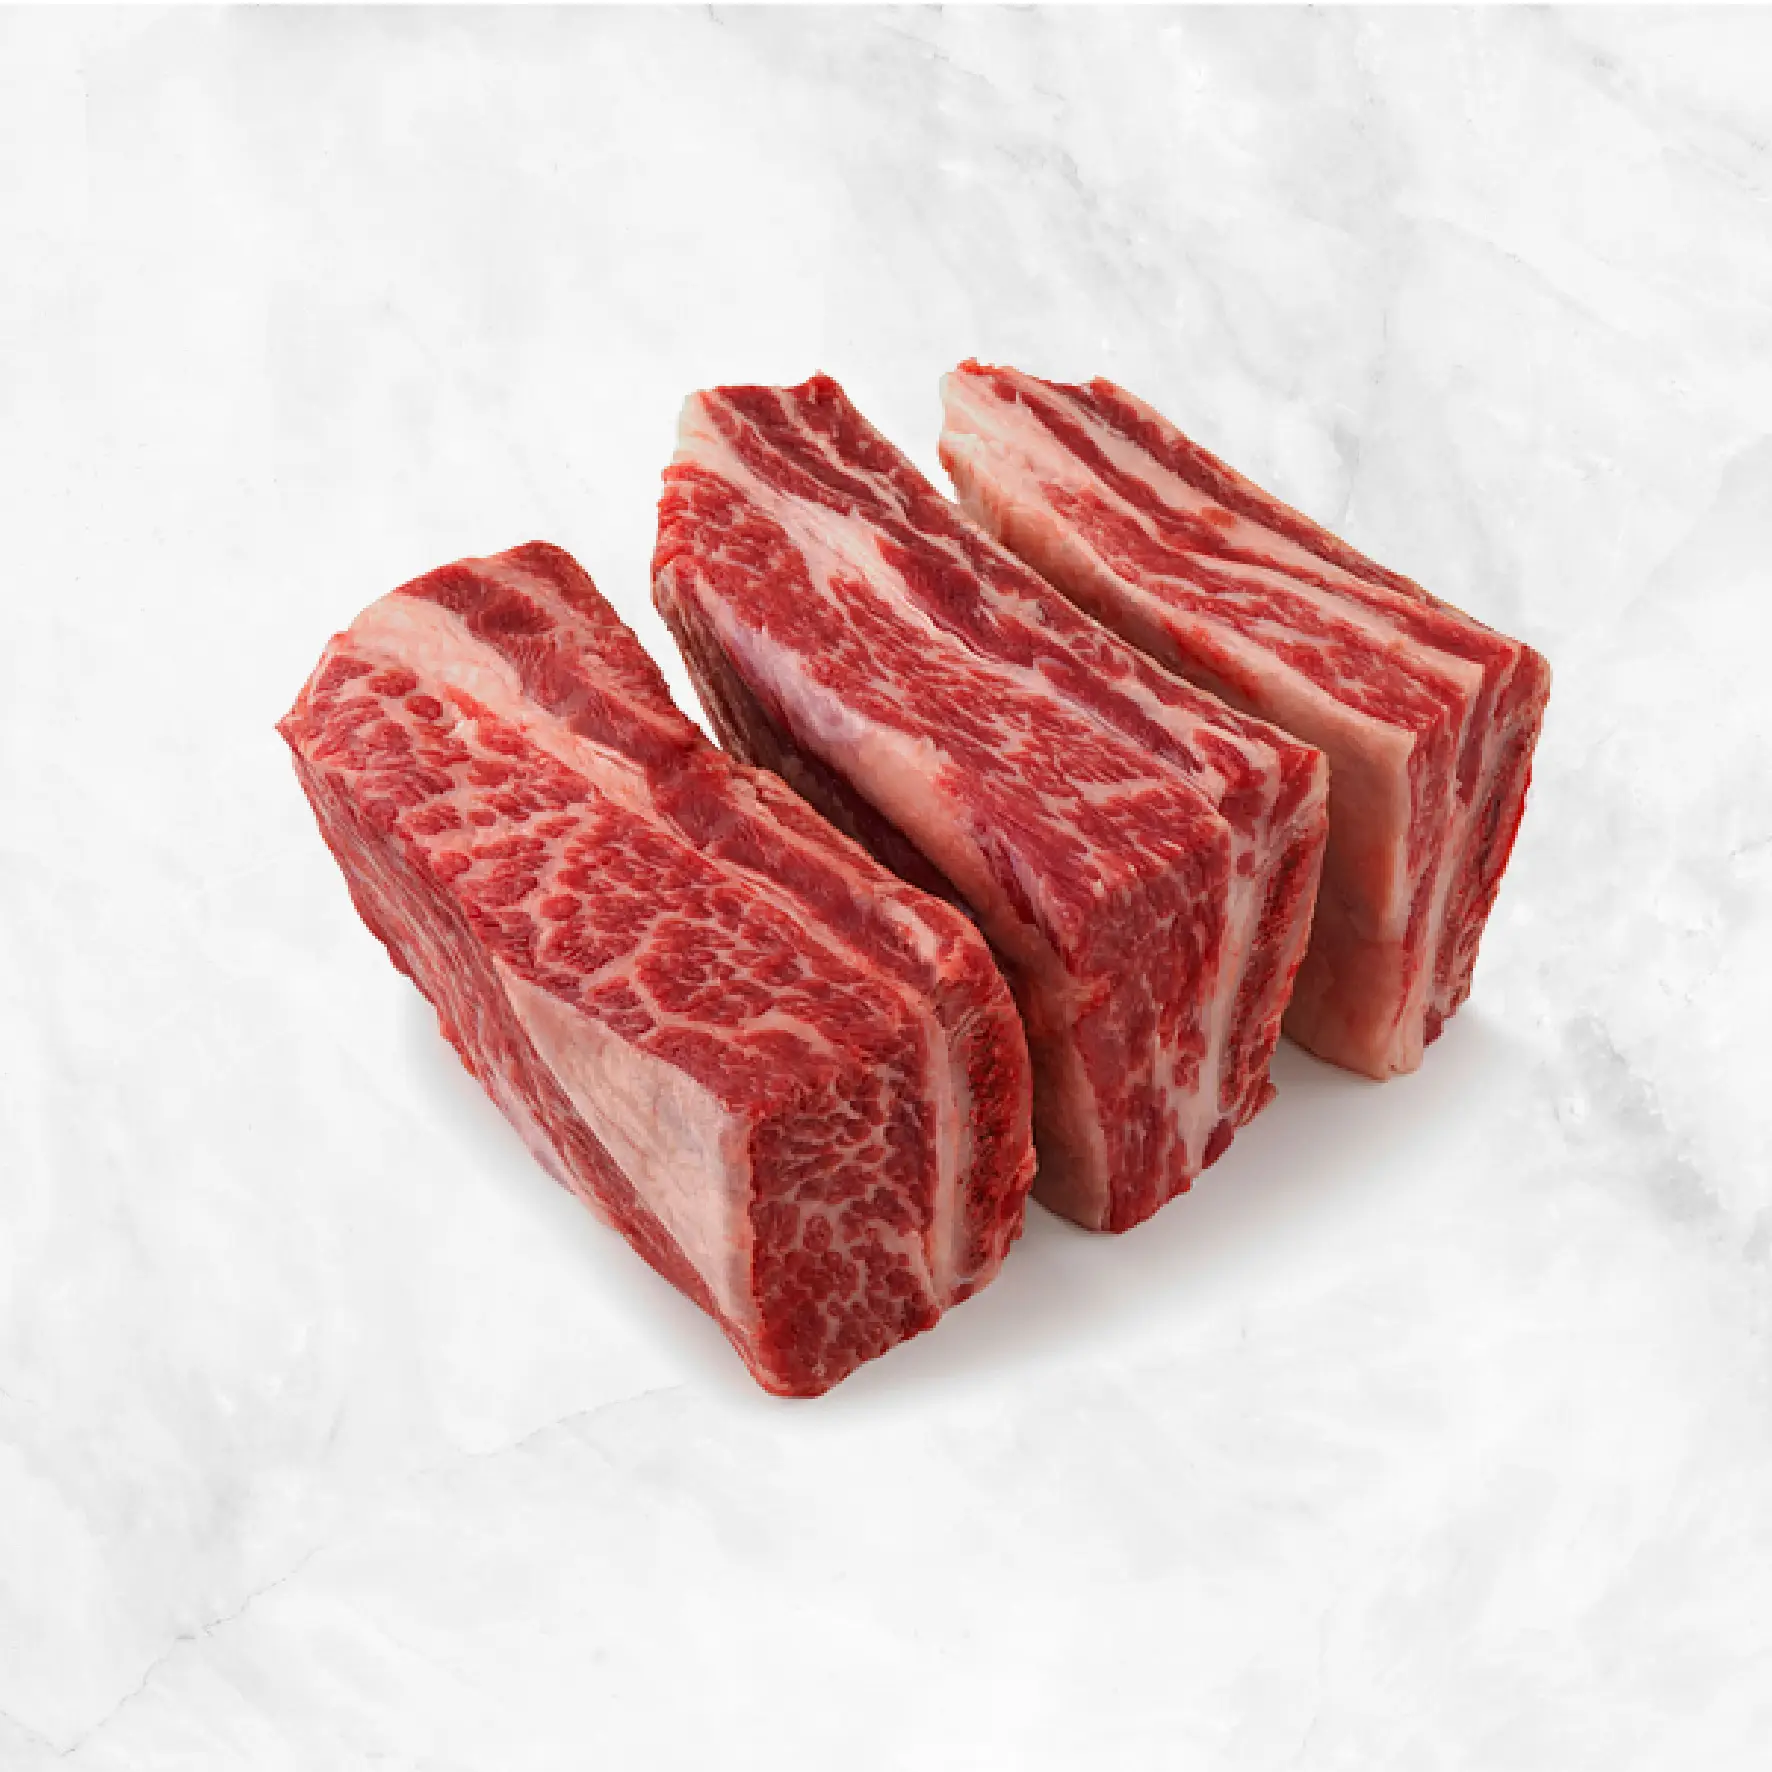 English Cut Beef Short Ribs Delivery